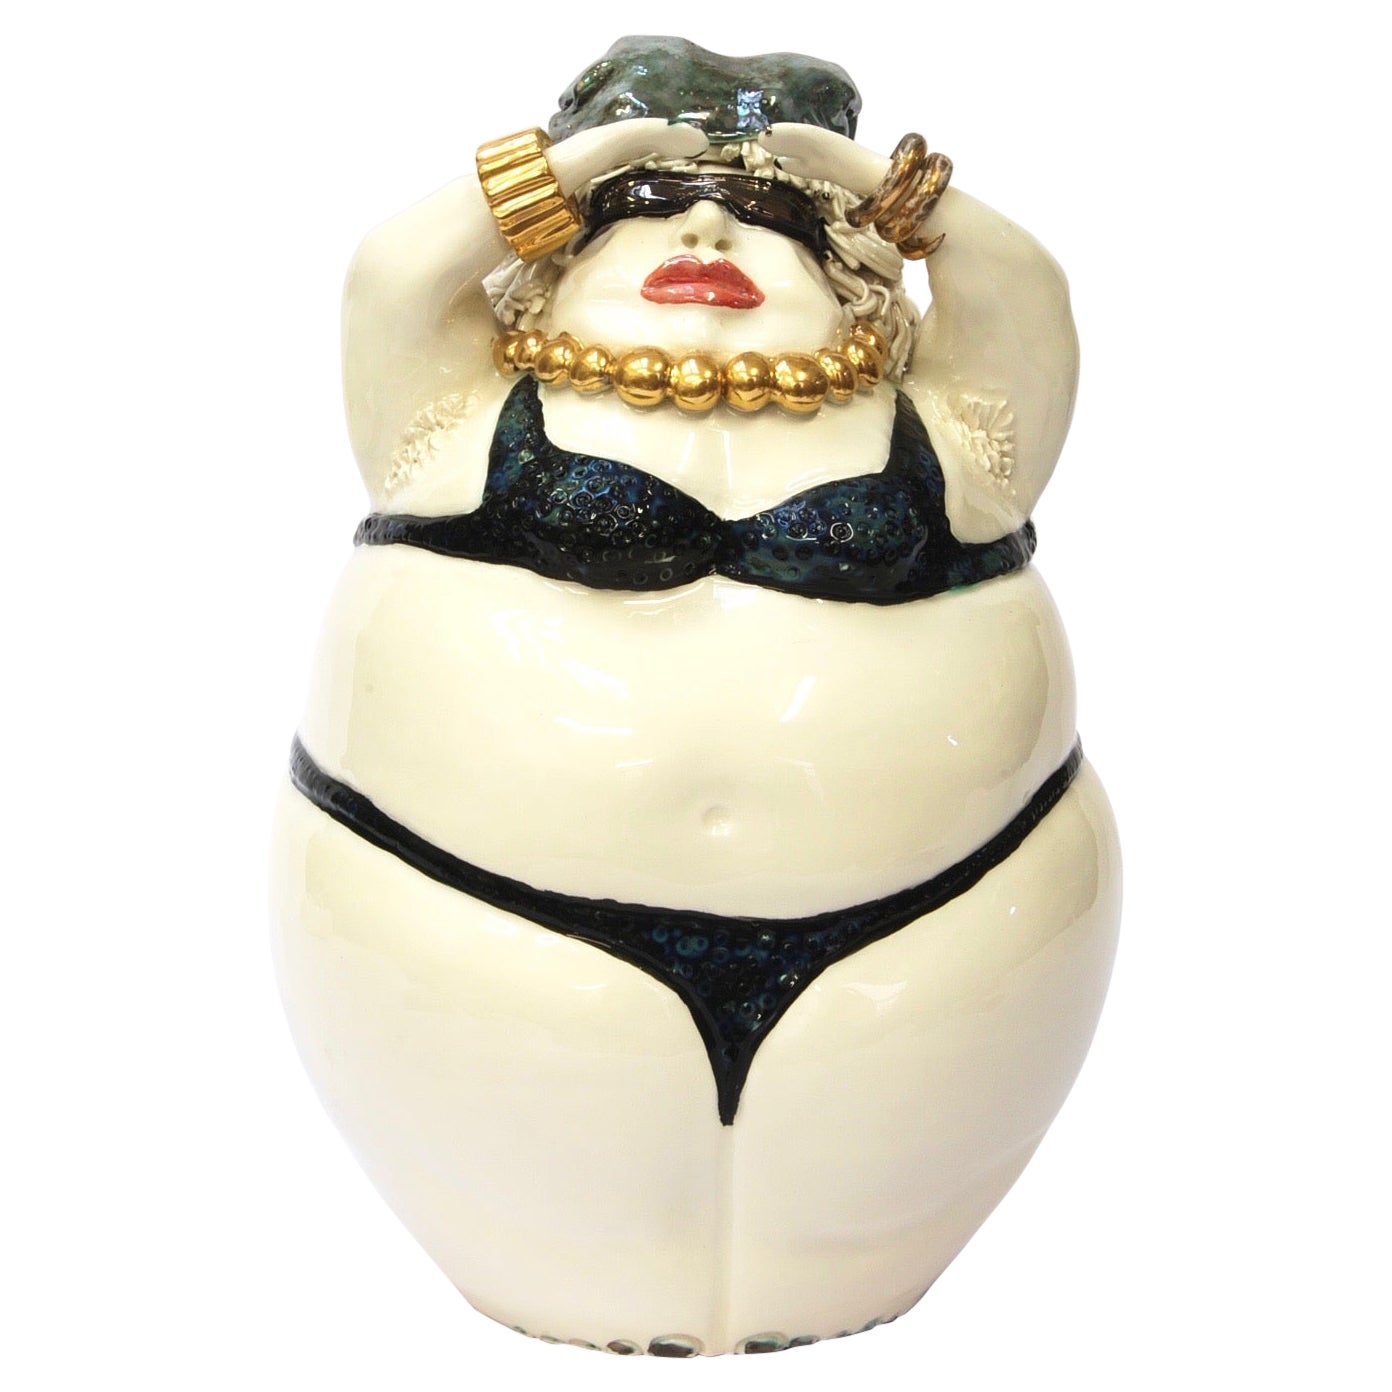 Sunbathing Lady Decorative Centerpiece, Handmade Italy, 2020, Hand-Crafted For Sale